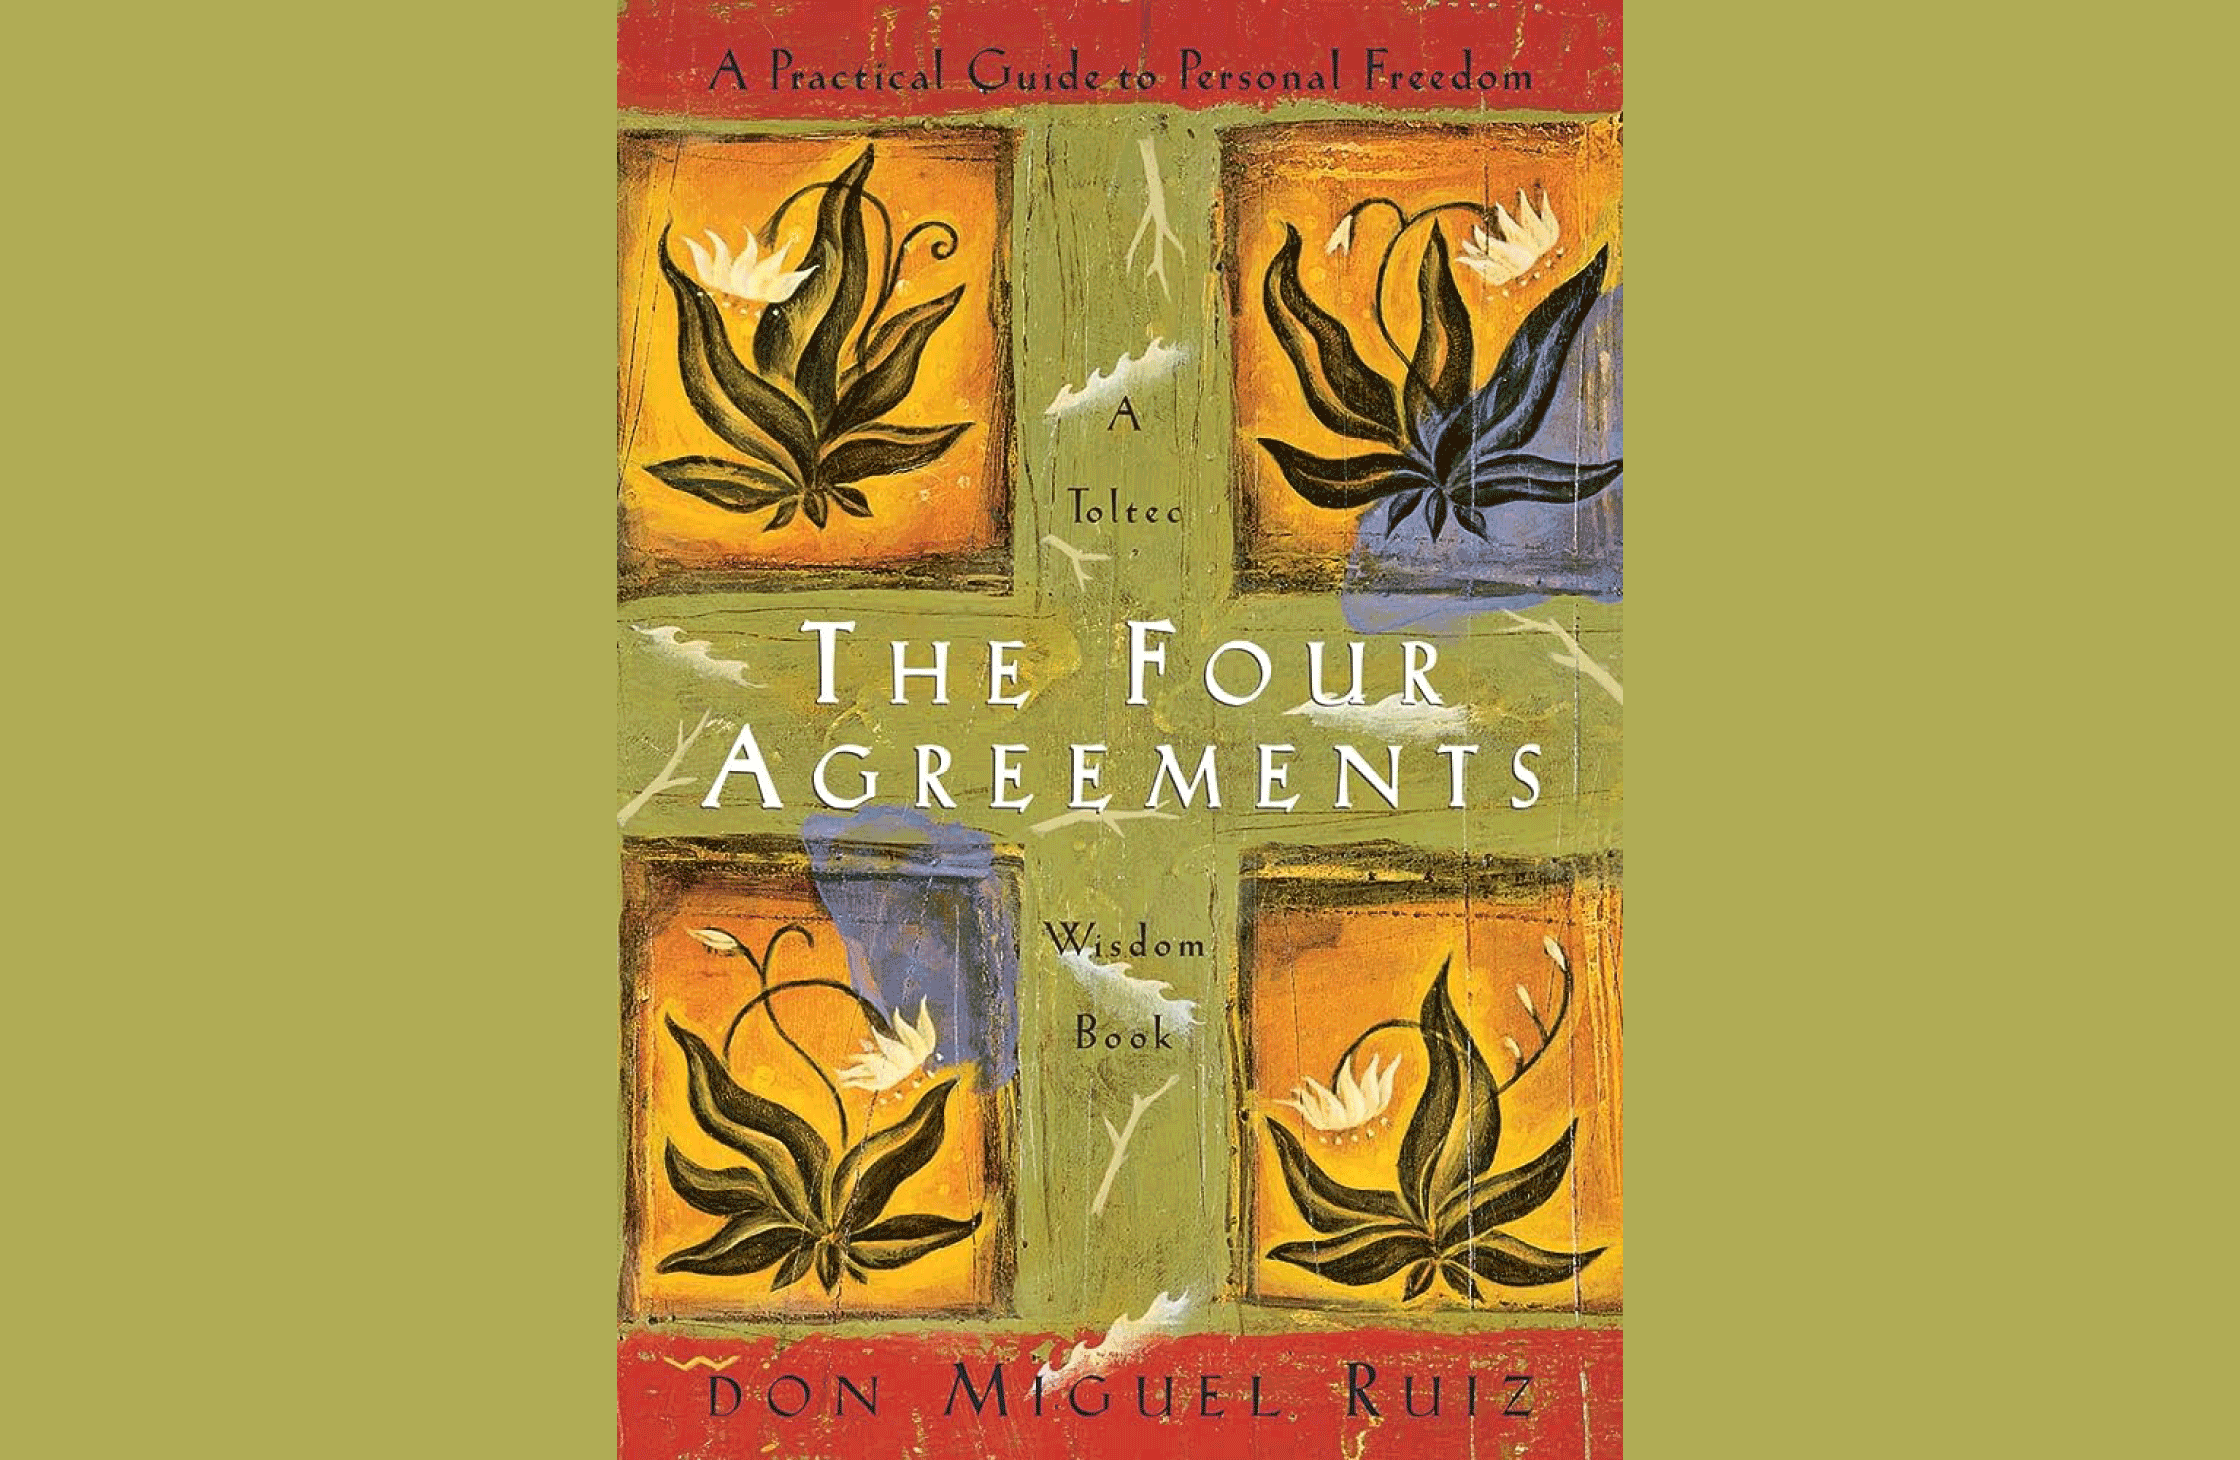 Summary: The Four Agreements by Don Miguel Ruiz